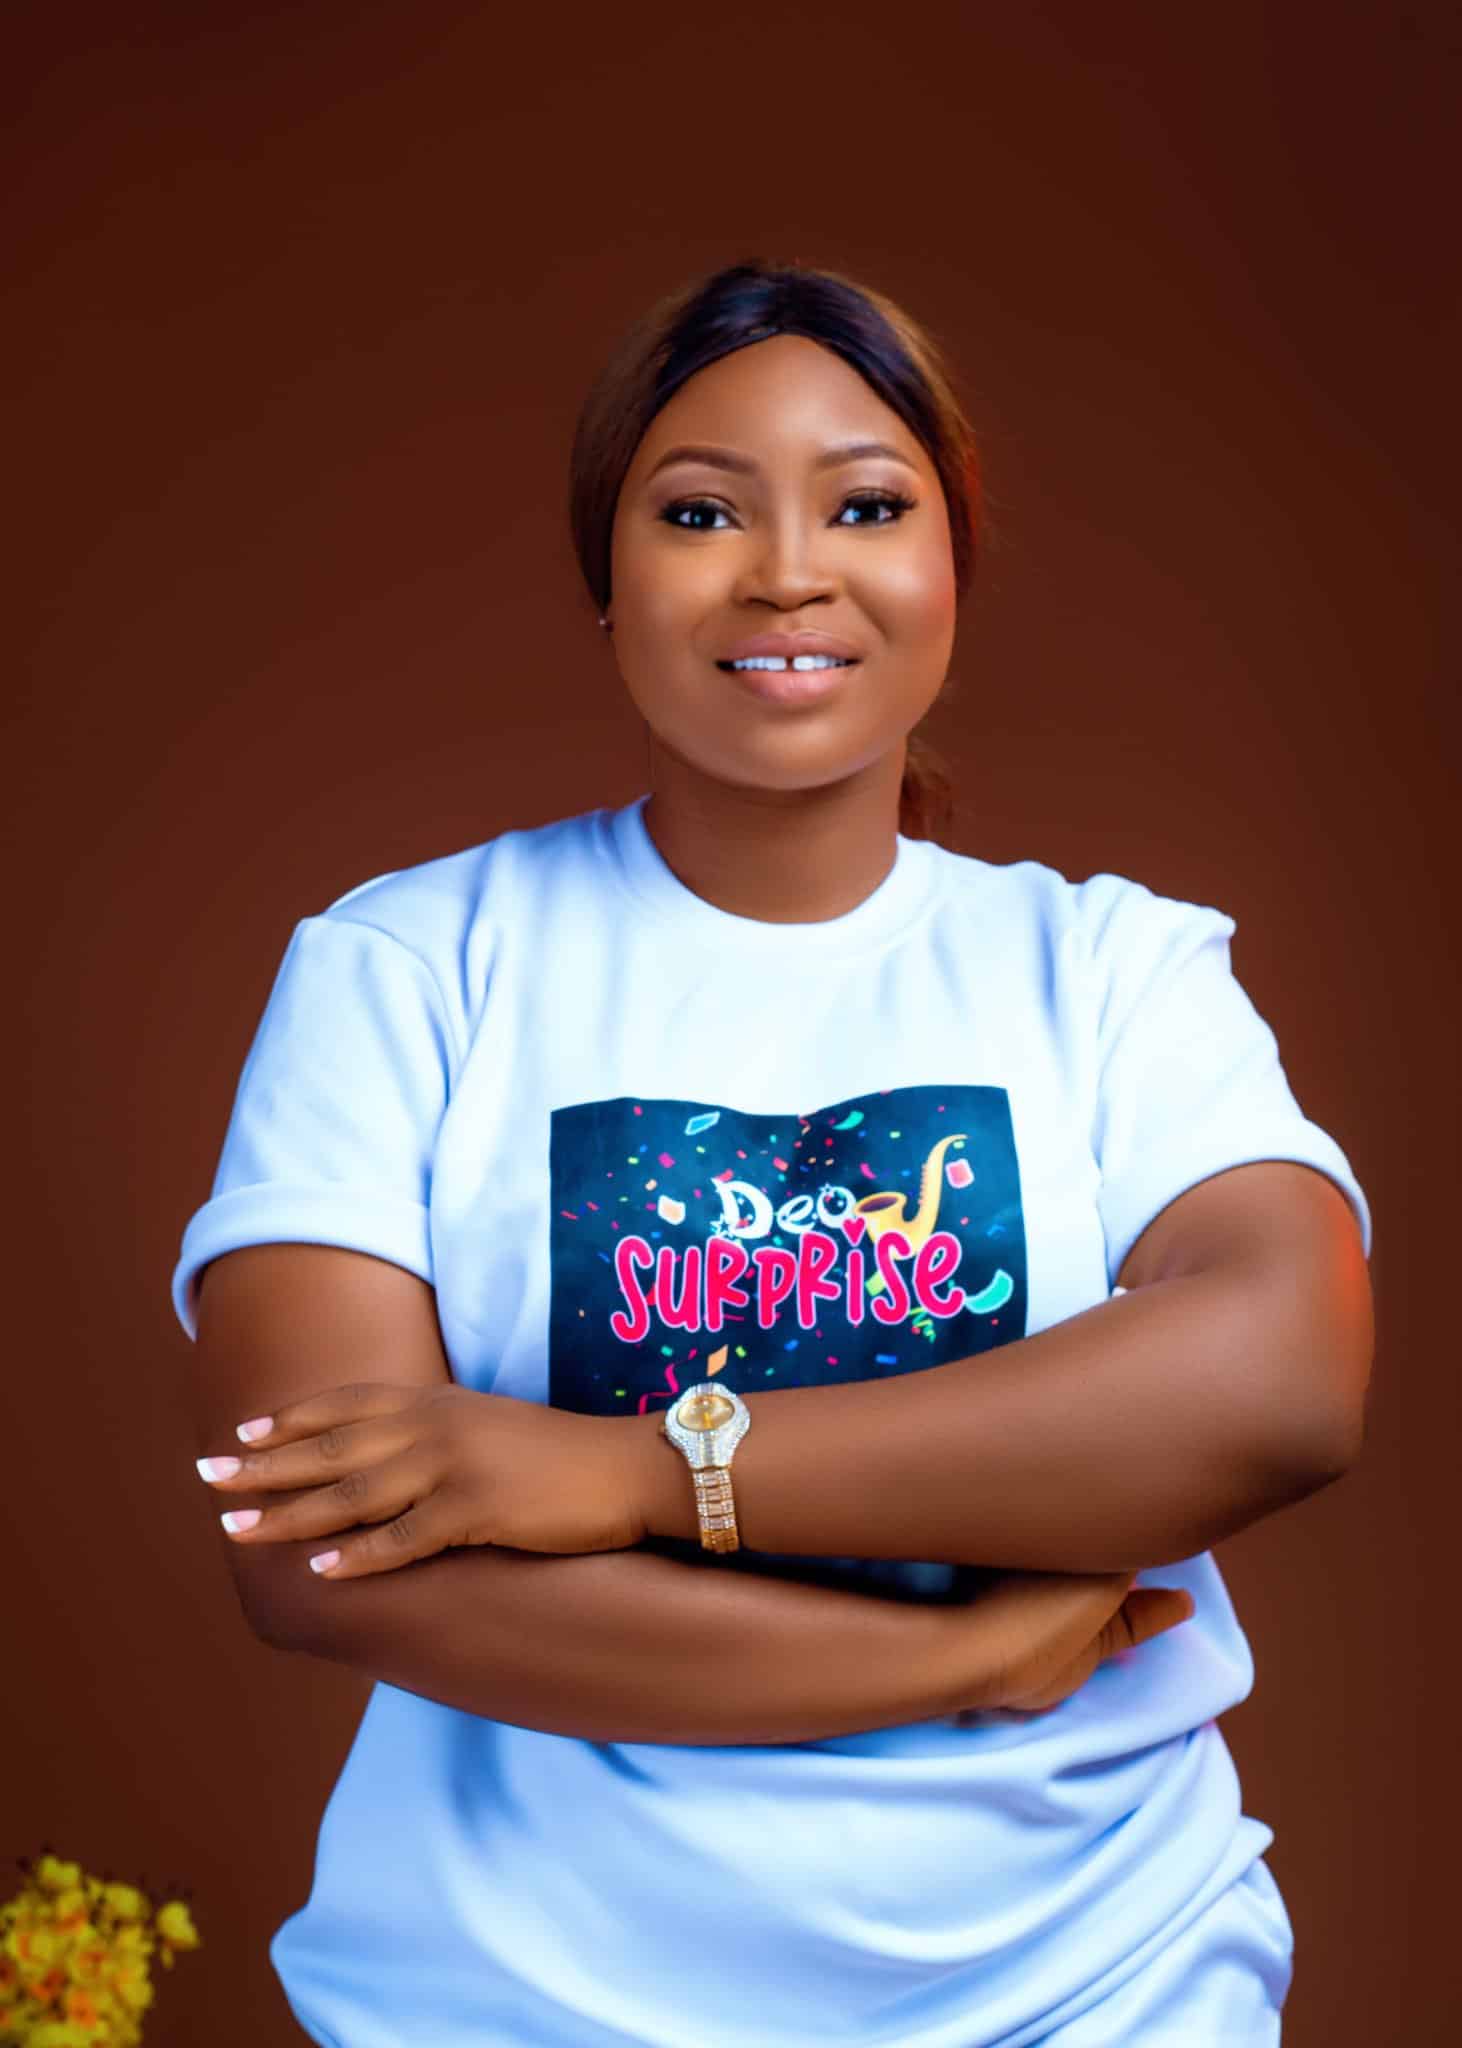 5 quick things to know about Chef Deo, a lady from Ondo who wants to cook for 150 hours